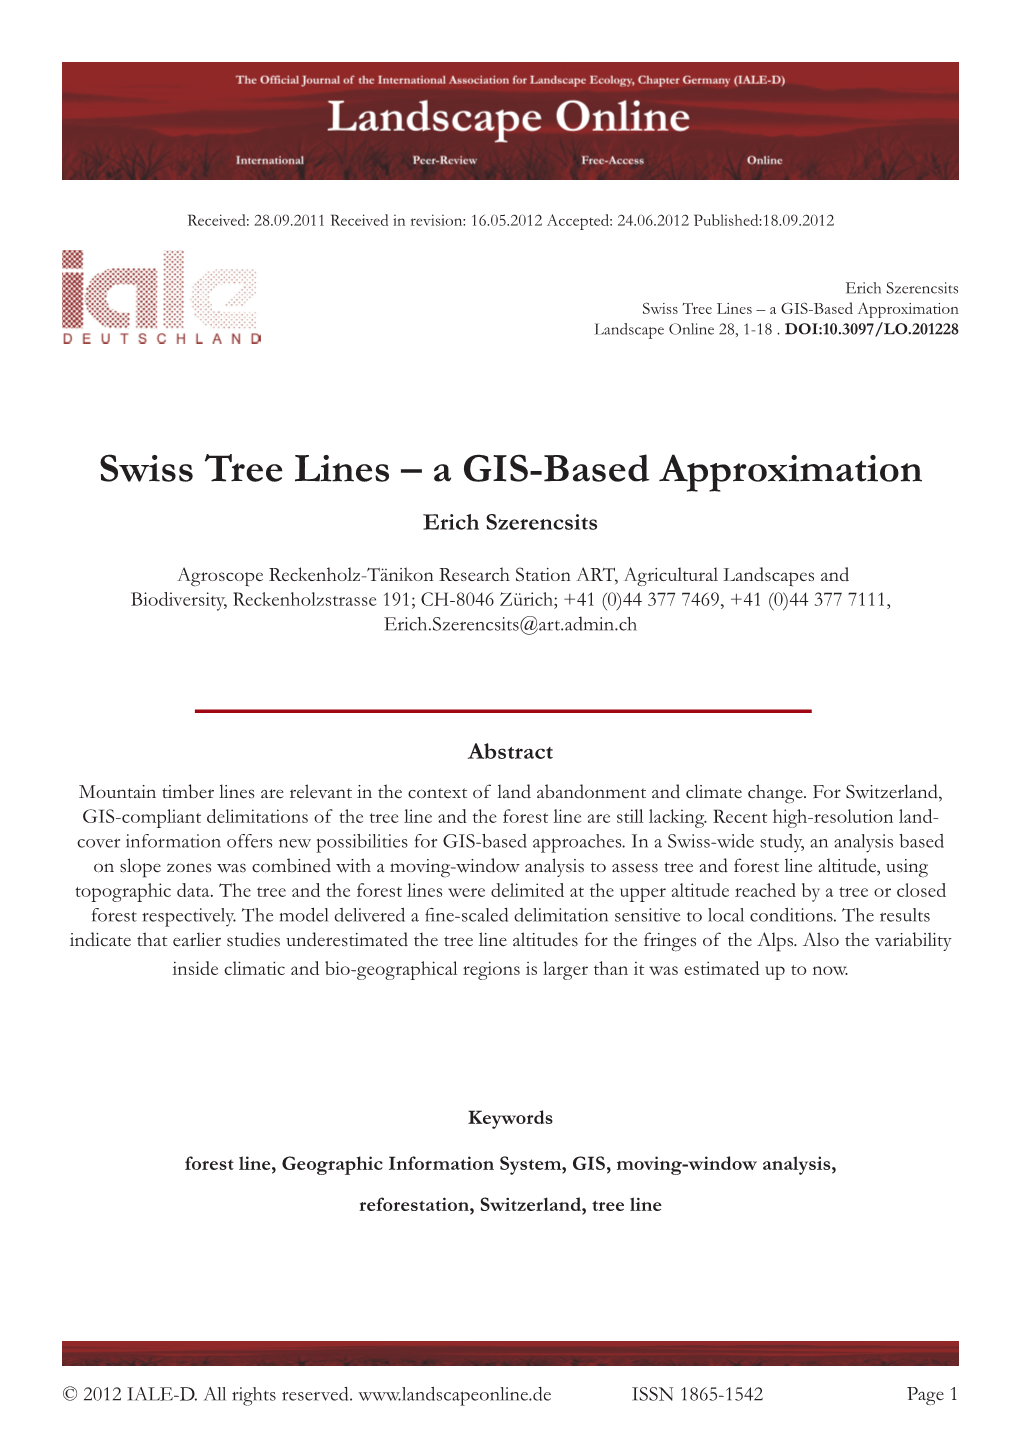 Swiss Tree Lines – a GIS-Based Approximation Landscape Online 28, 1-18